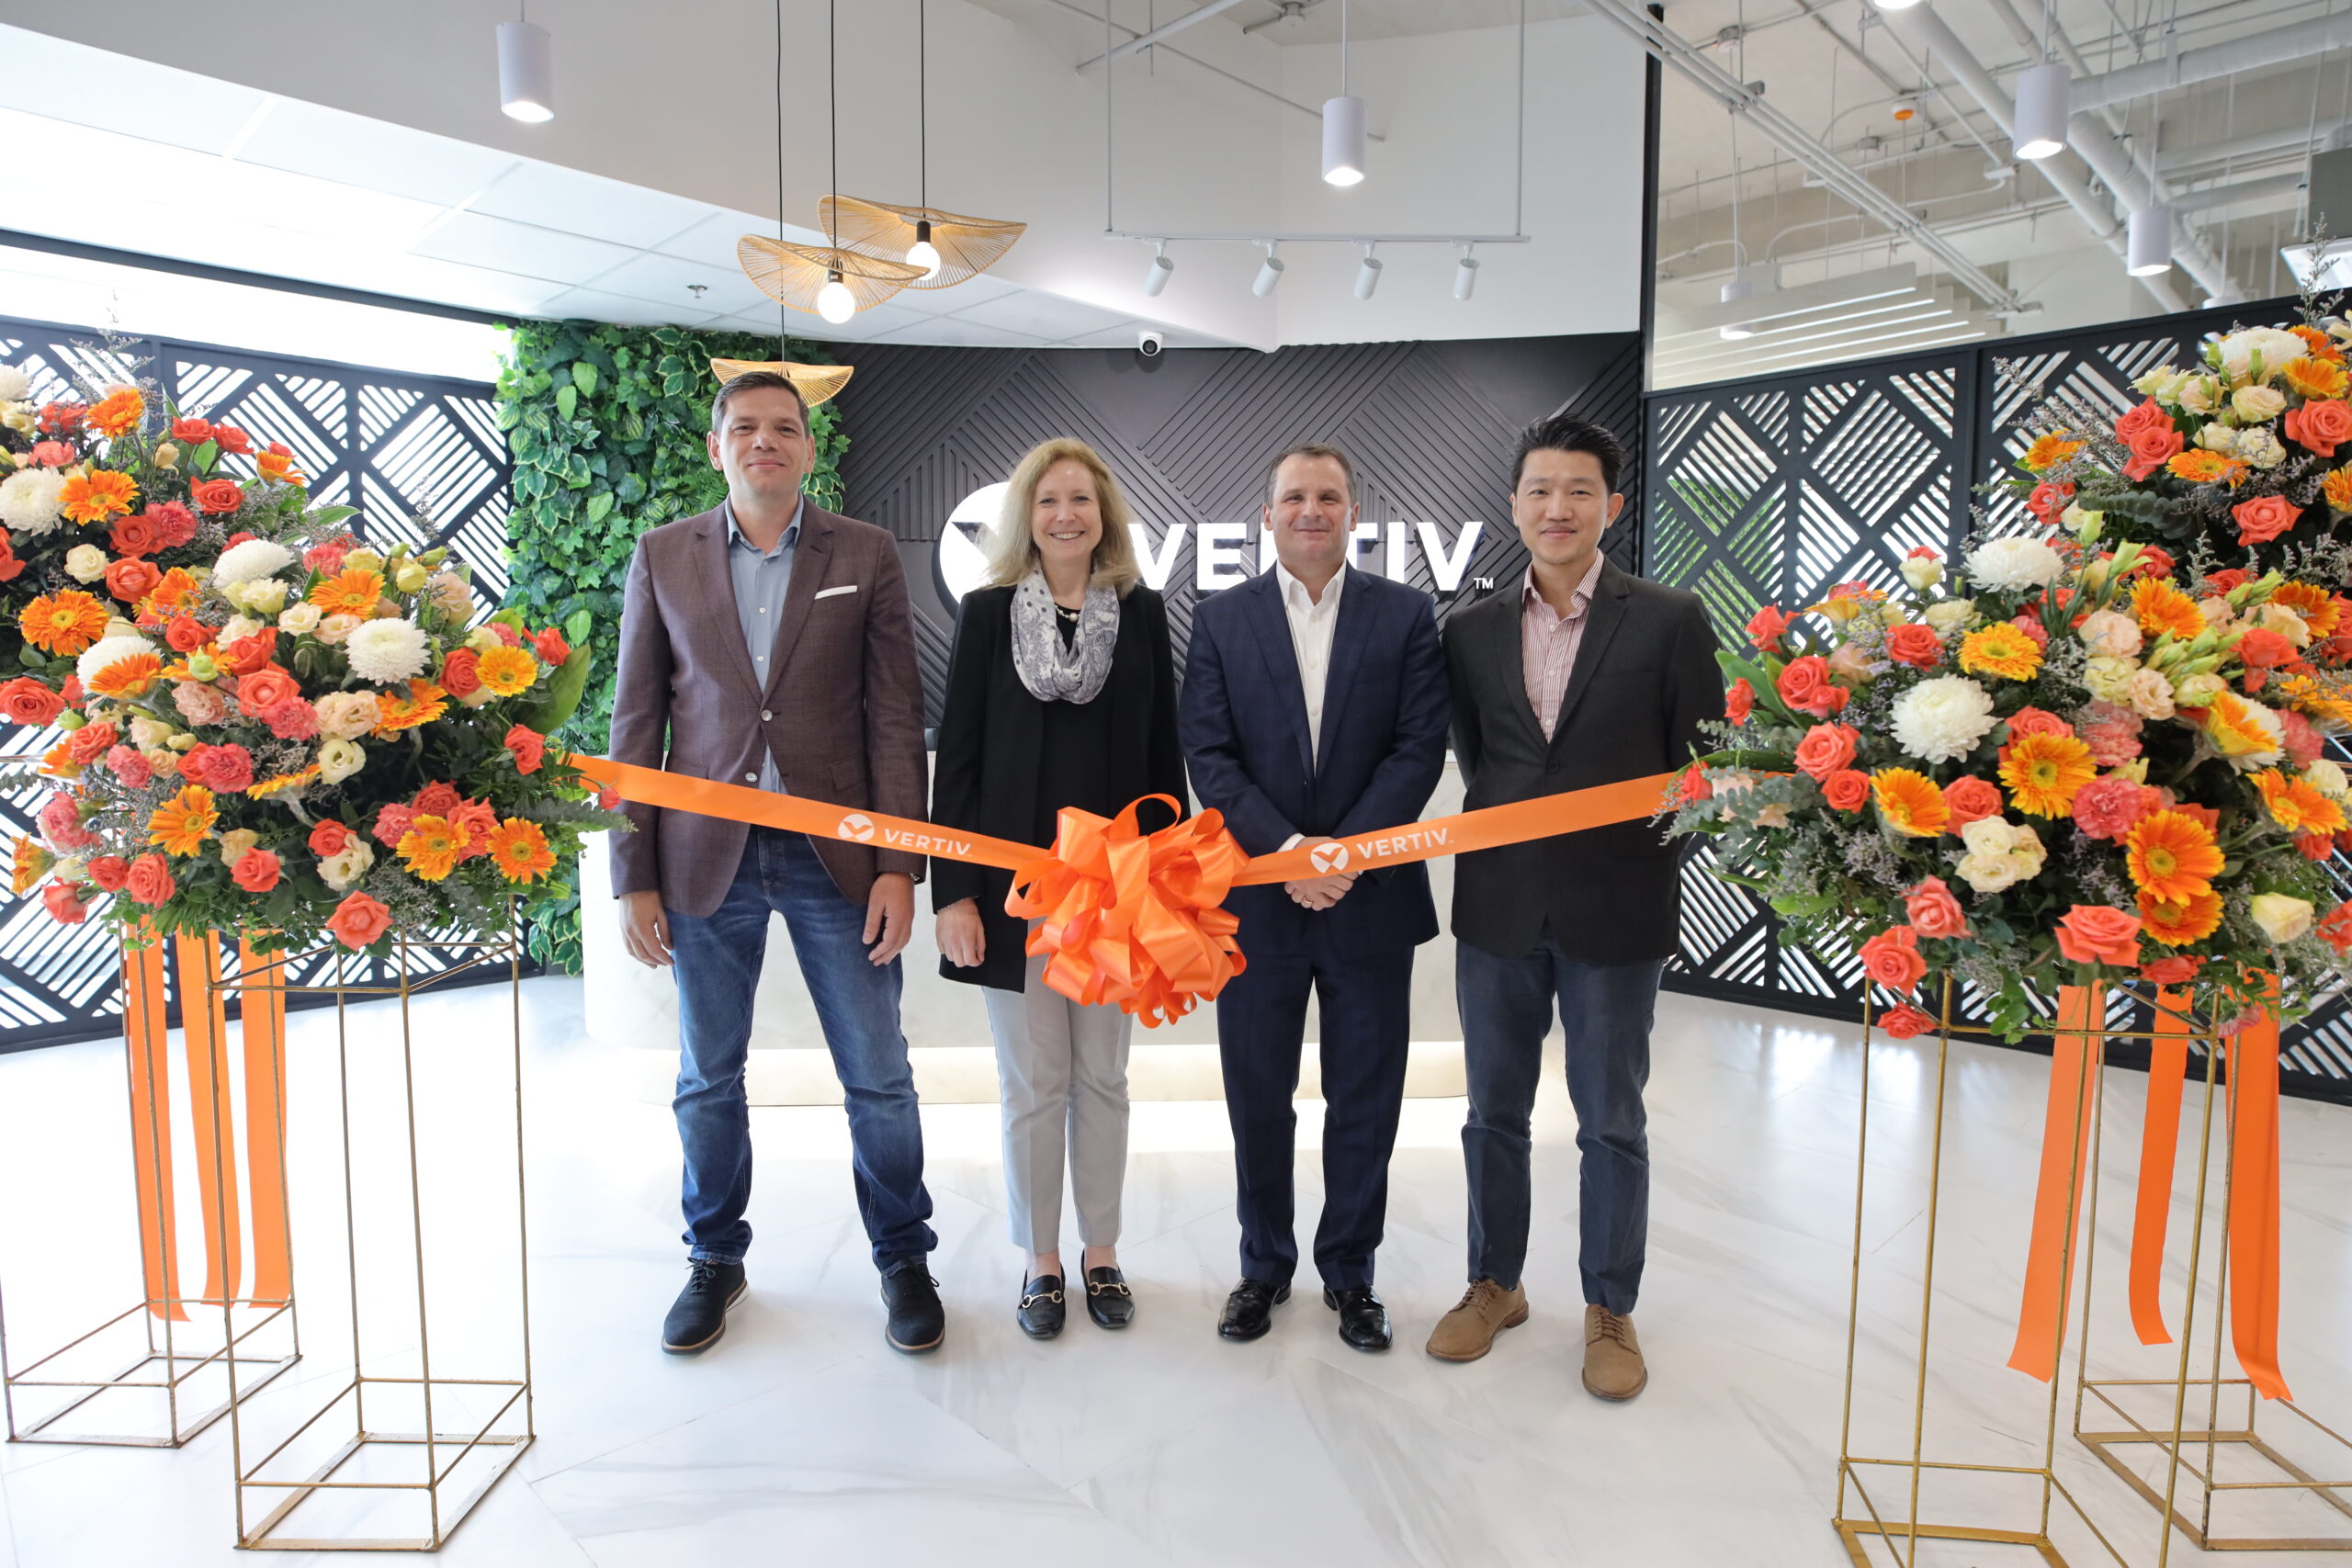 Vertiv Announces Opening of New Philippines Office and Customer Experience Center at SM Mega Tower